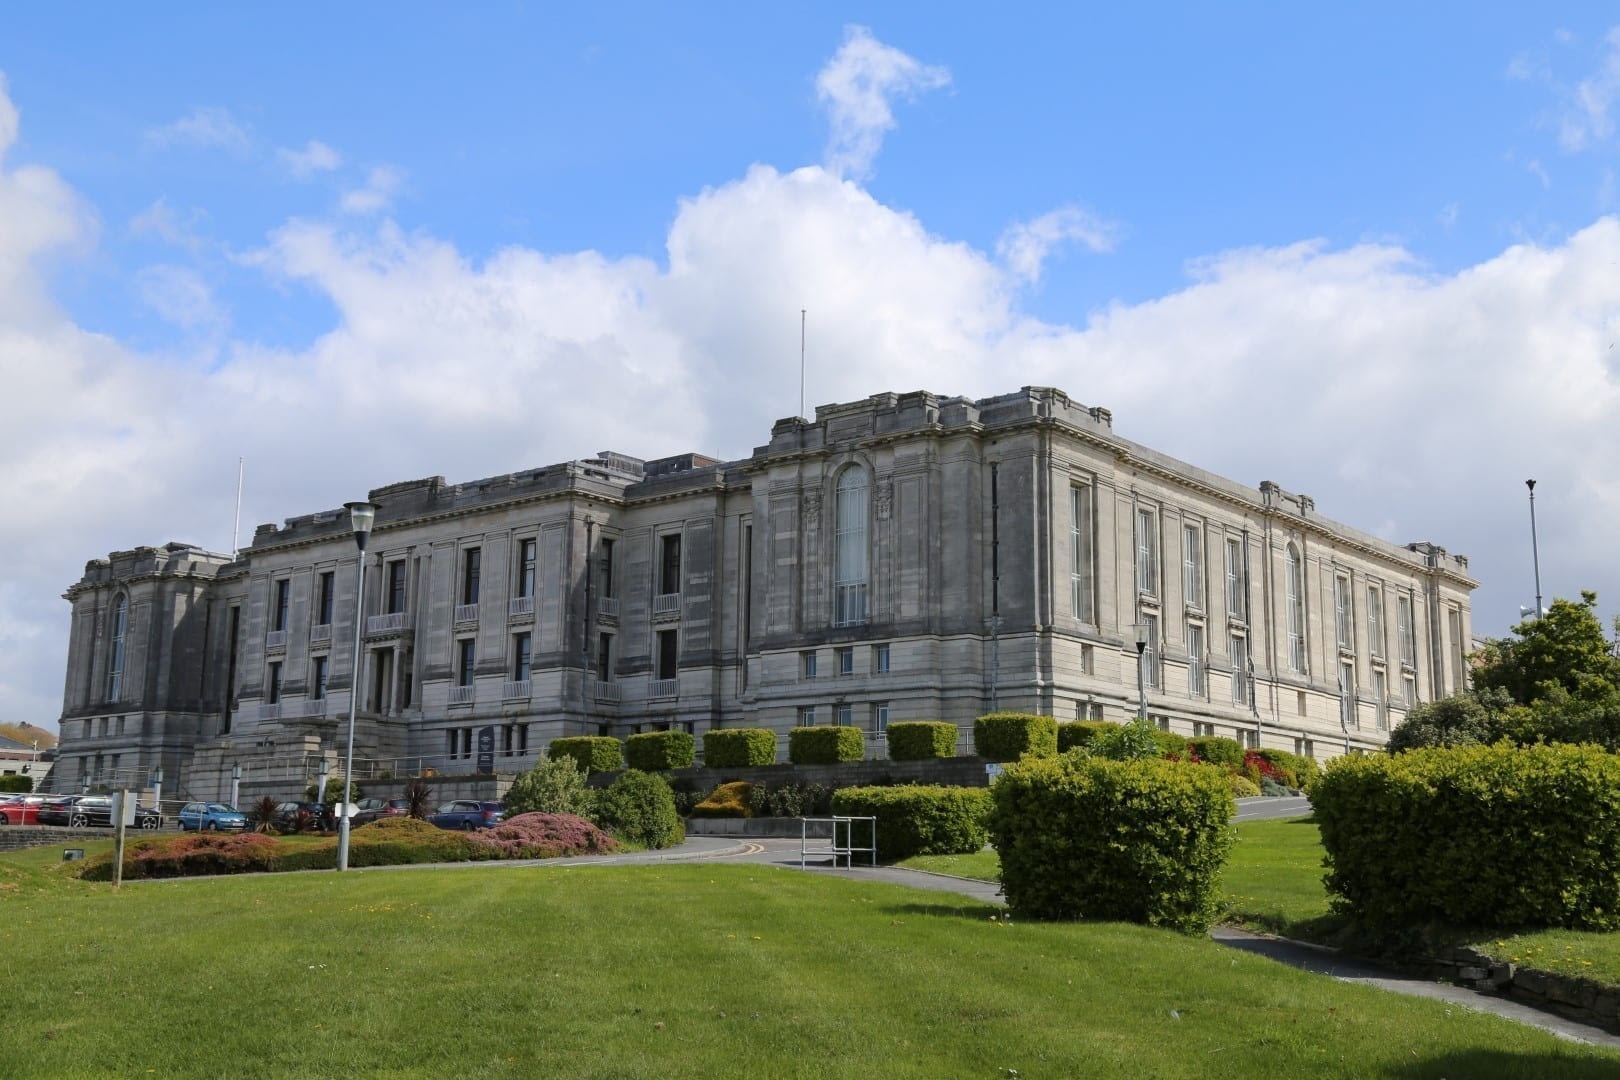  National Library of Wales - Aberystwyth,Wales, UK